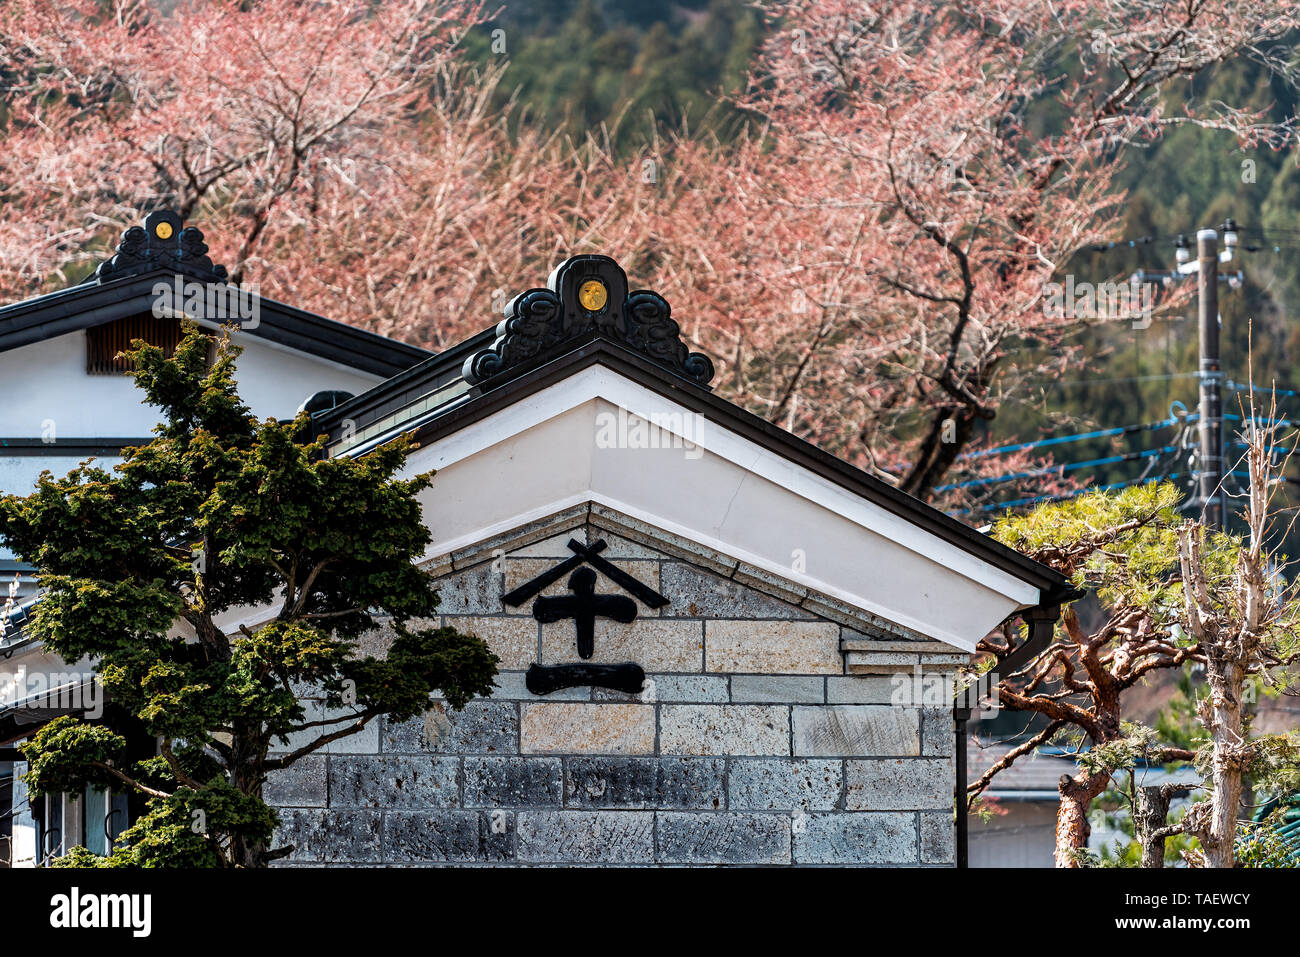 Nikko, Japan - April 4, 2019: Tochigi prefecture village with traditional house building and kanji character sign Stock Photo